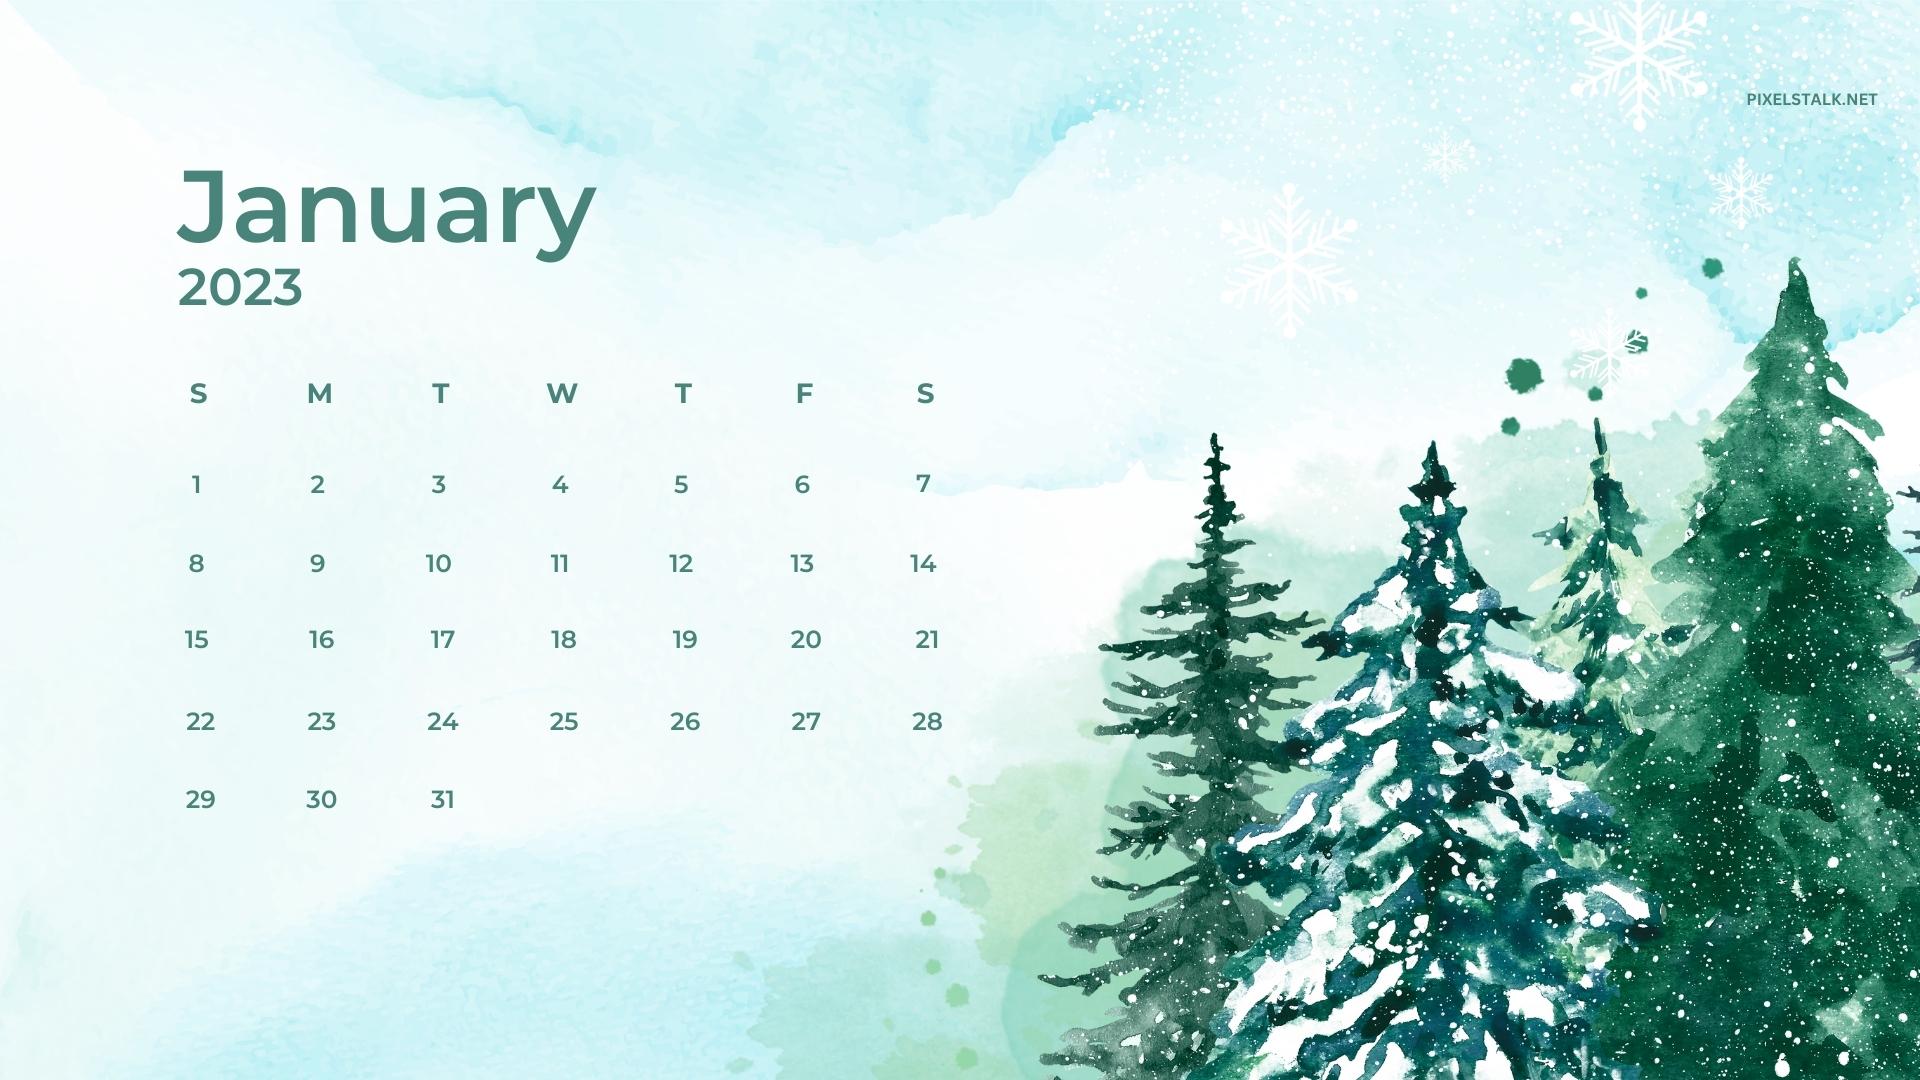 january wallpaper  January wallpaper Winter background Winter backgrounds  iphone